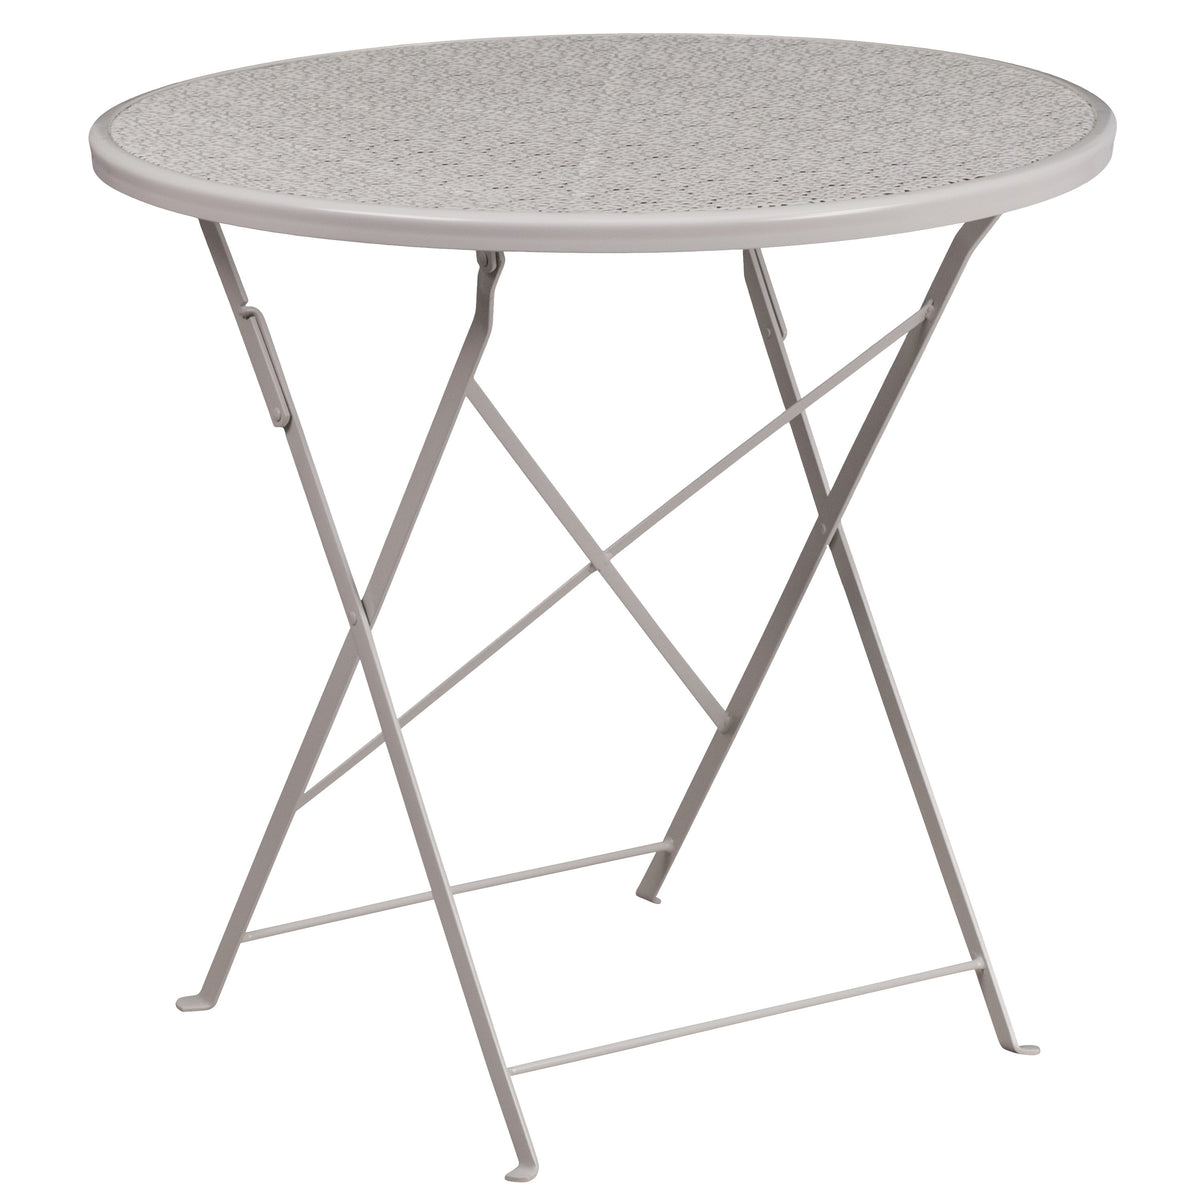 Light Gray |#| 30inch Round Light Gray Indoor-Outdoor Steel Folding Patio Table Set with 2 Chairs